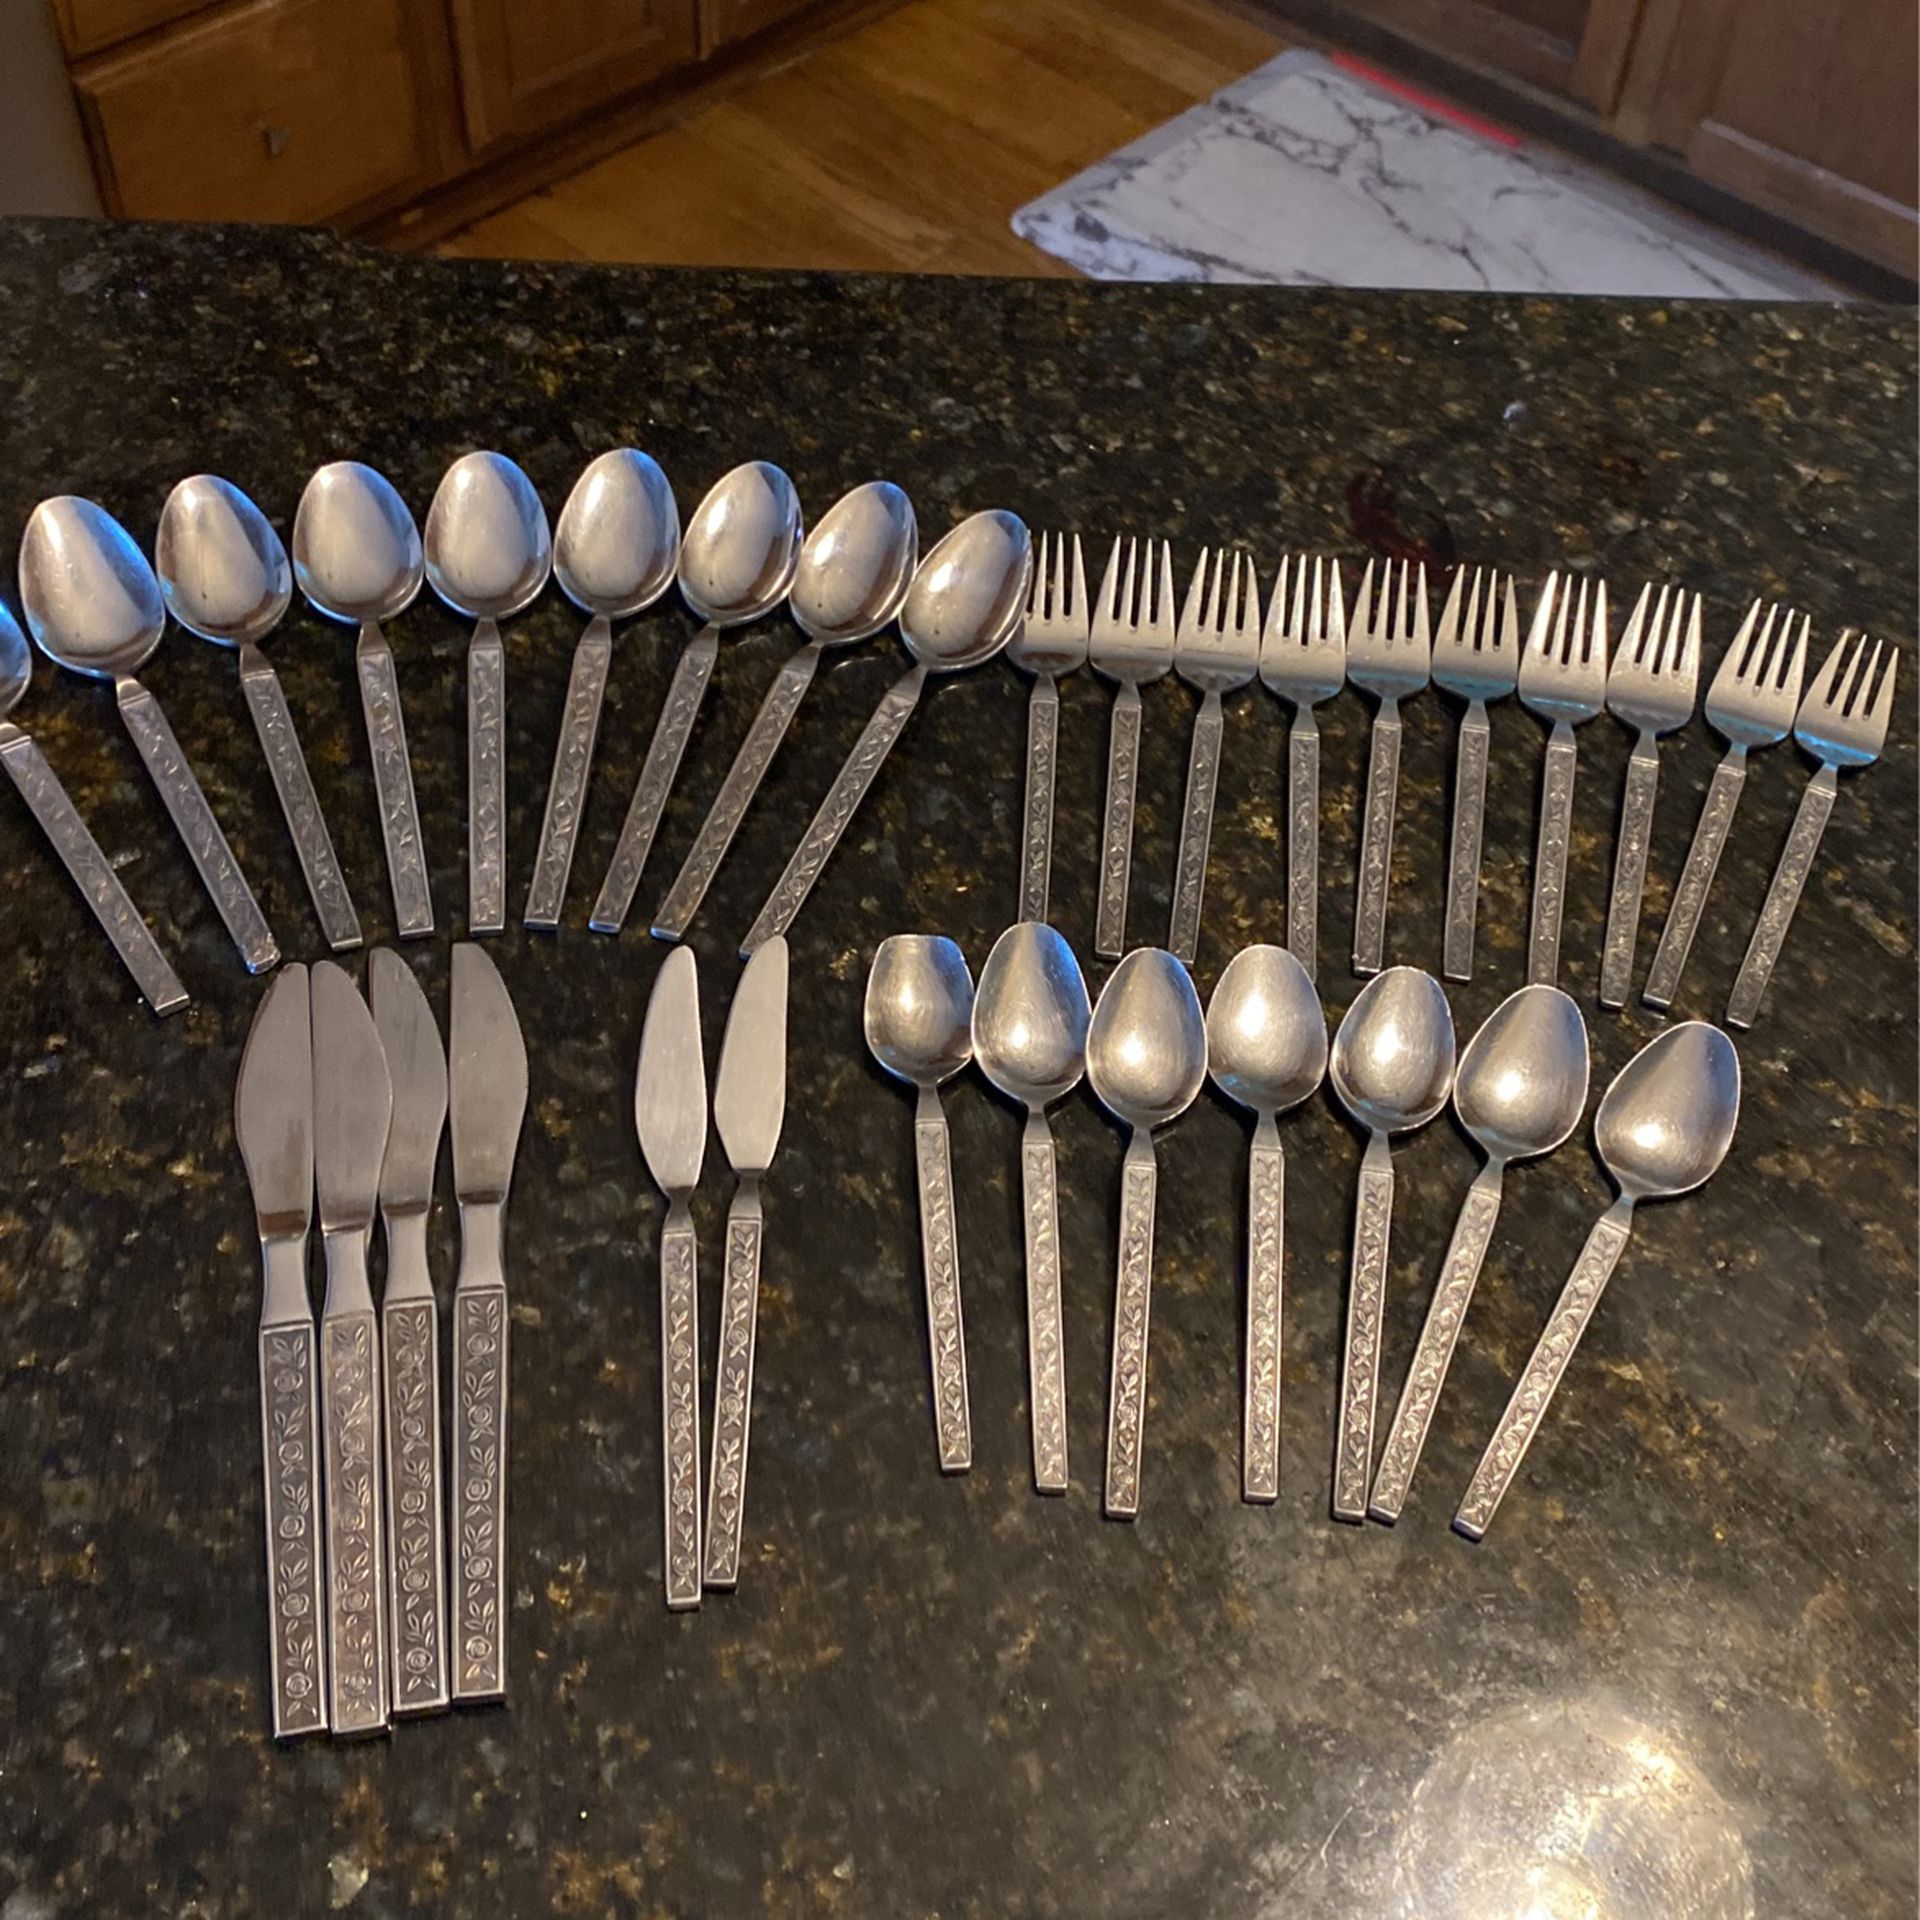 32 Pieces Of Vintage Silverware. Stainless